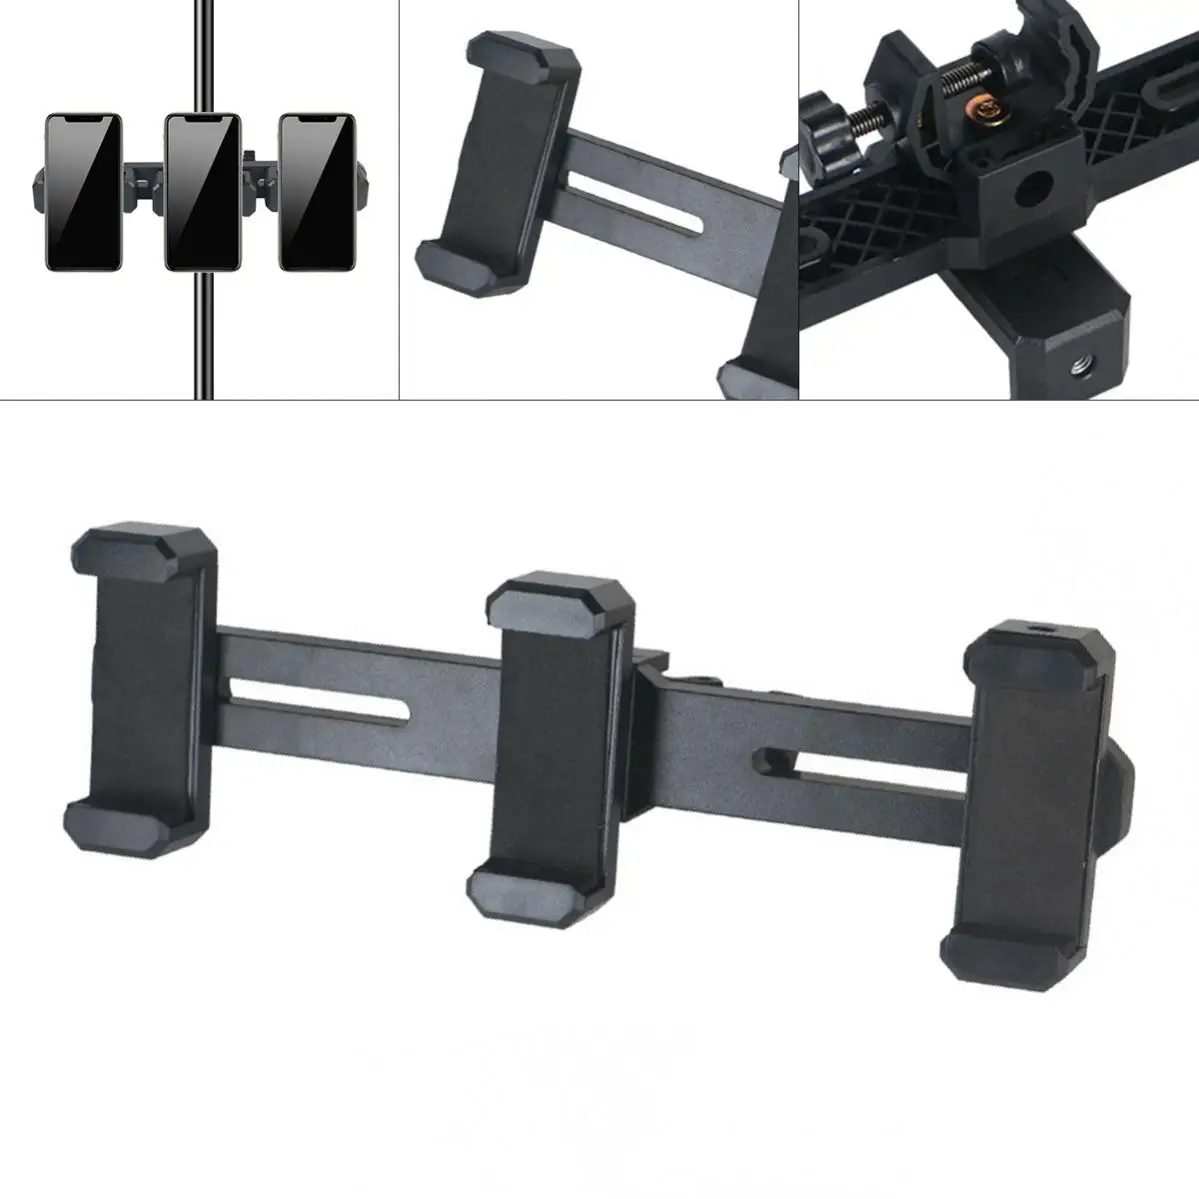 

Three Position Mobile Phone Stand Clip Bracket Holder for Live Tripod Fit for Microphone Tripod with Diameter Less Than 25mm